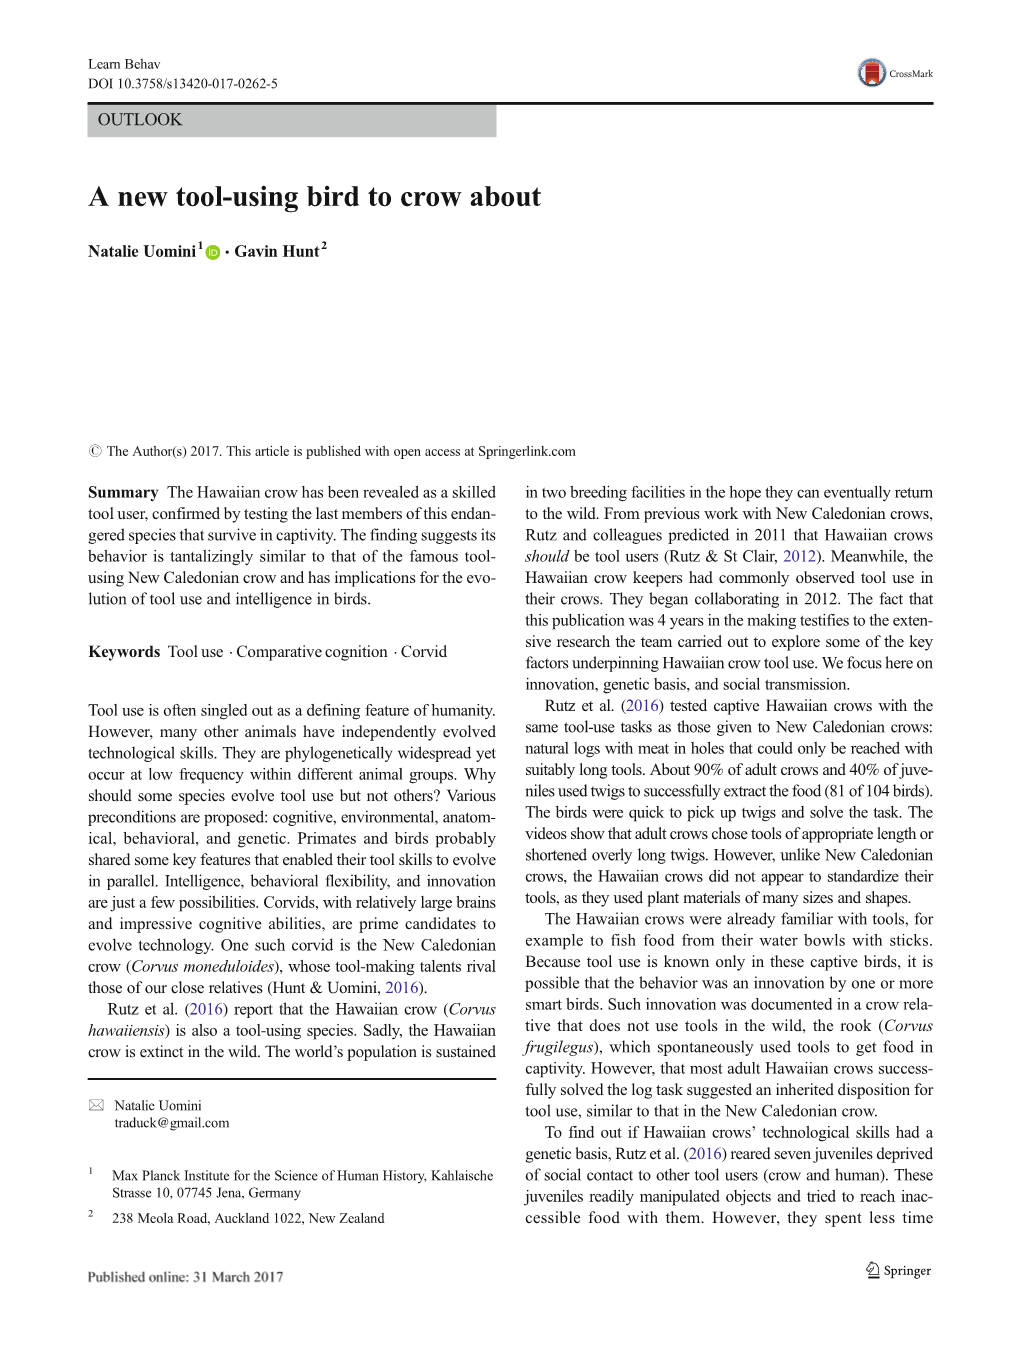 A New Tool-Using Bird to Crow About